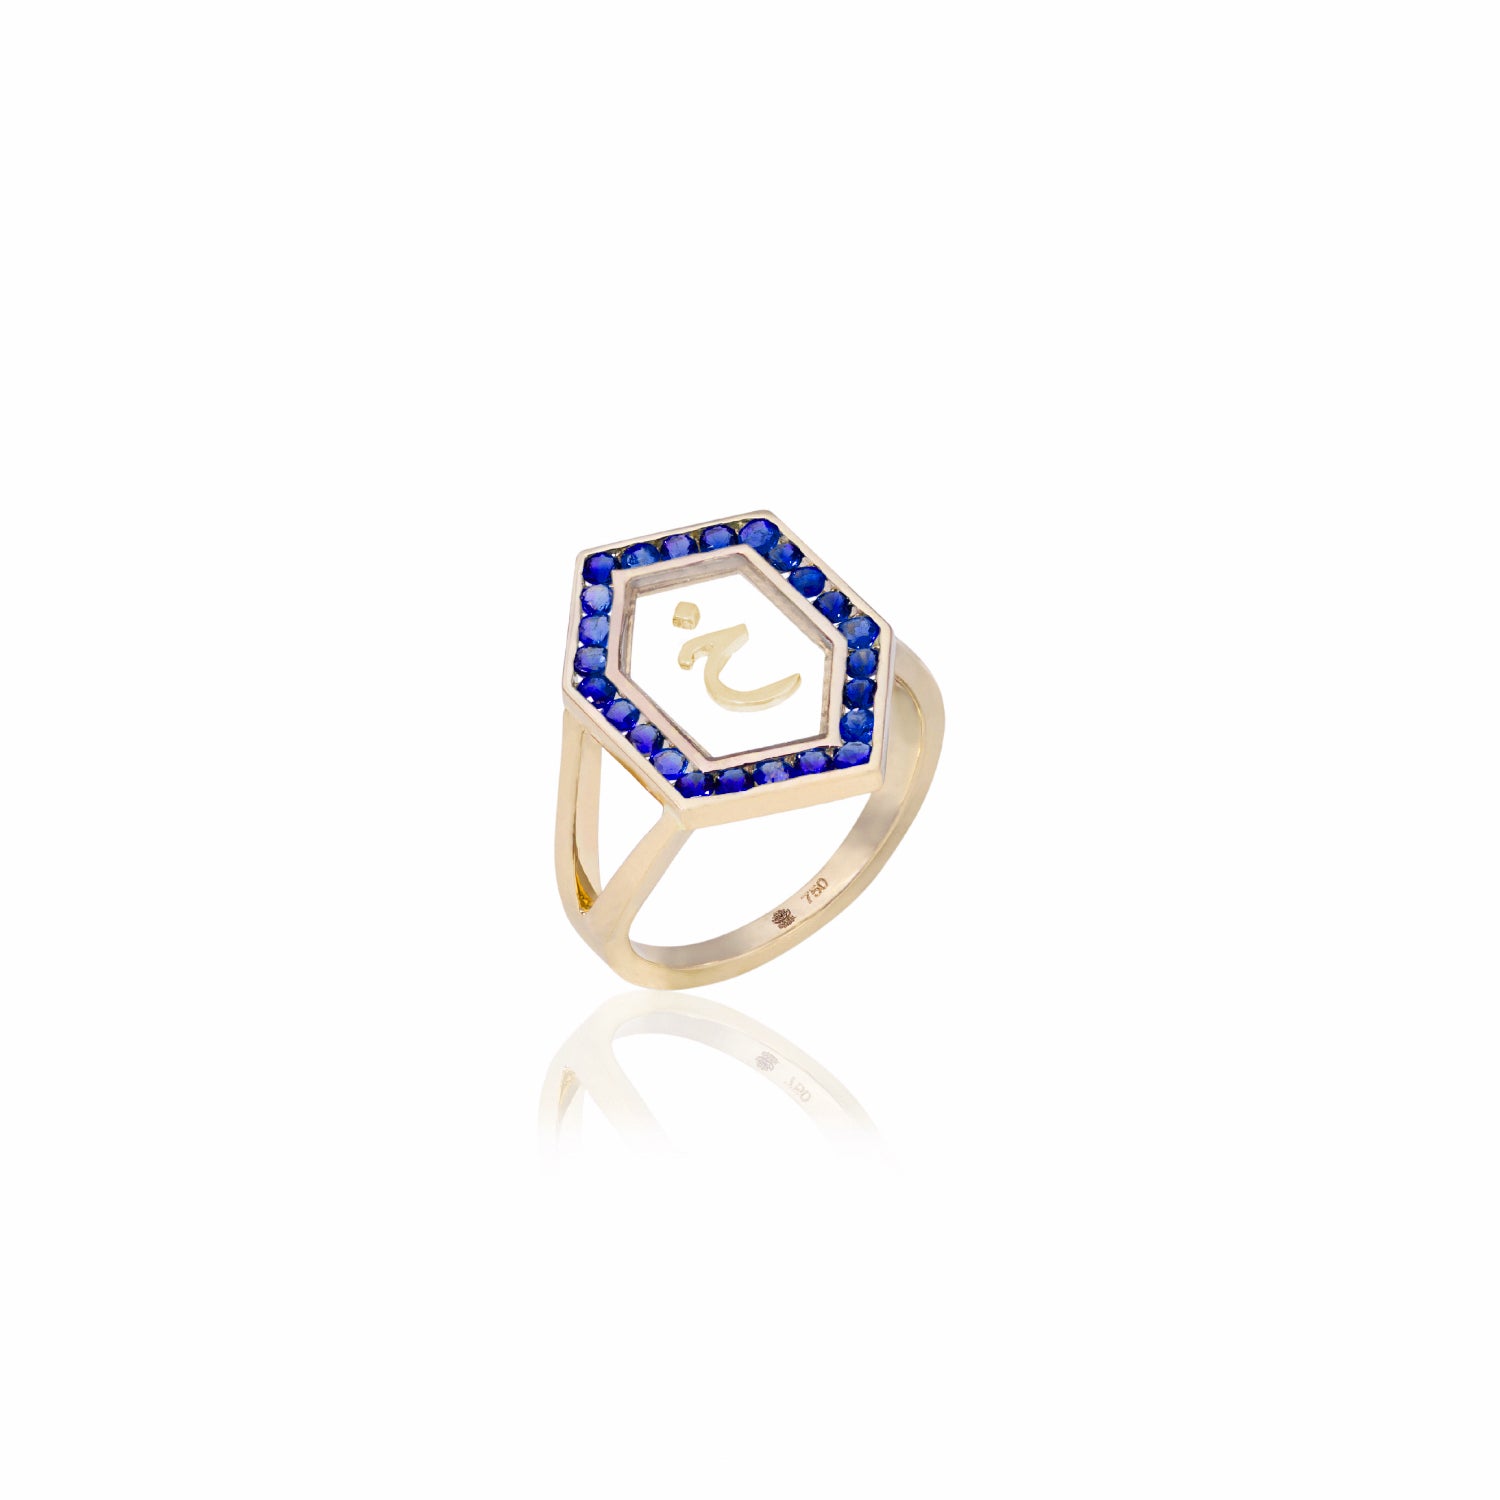 Qamoos 1.0 Letter خ Sapphire Ring in Yellow Gold